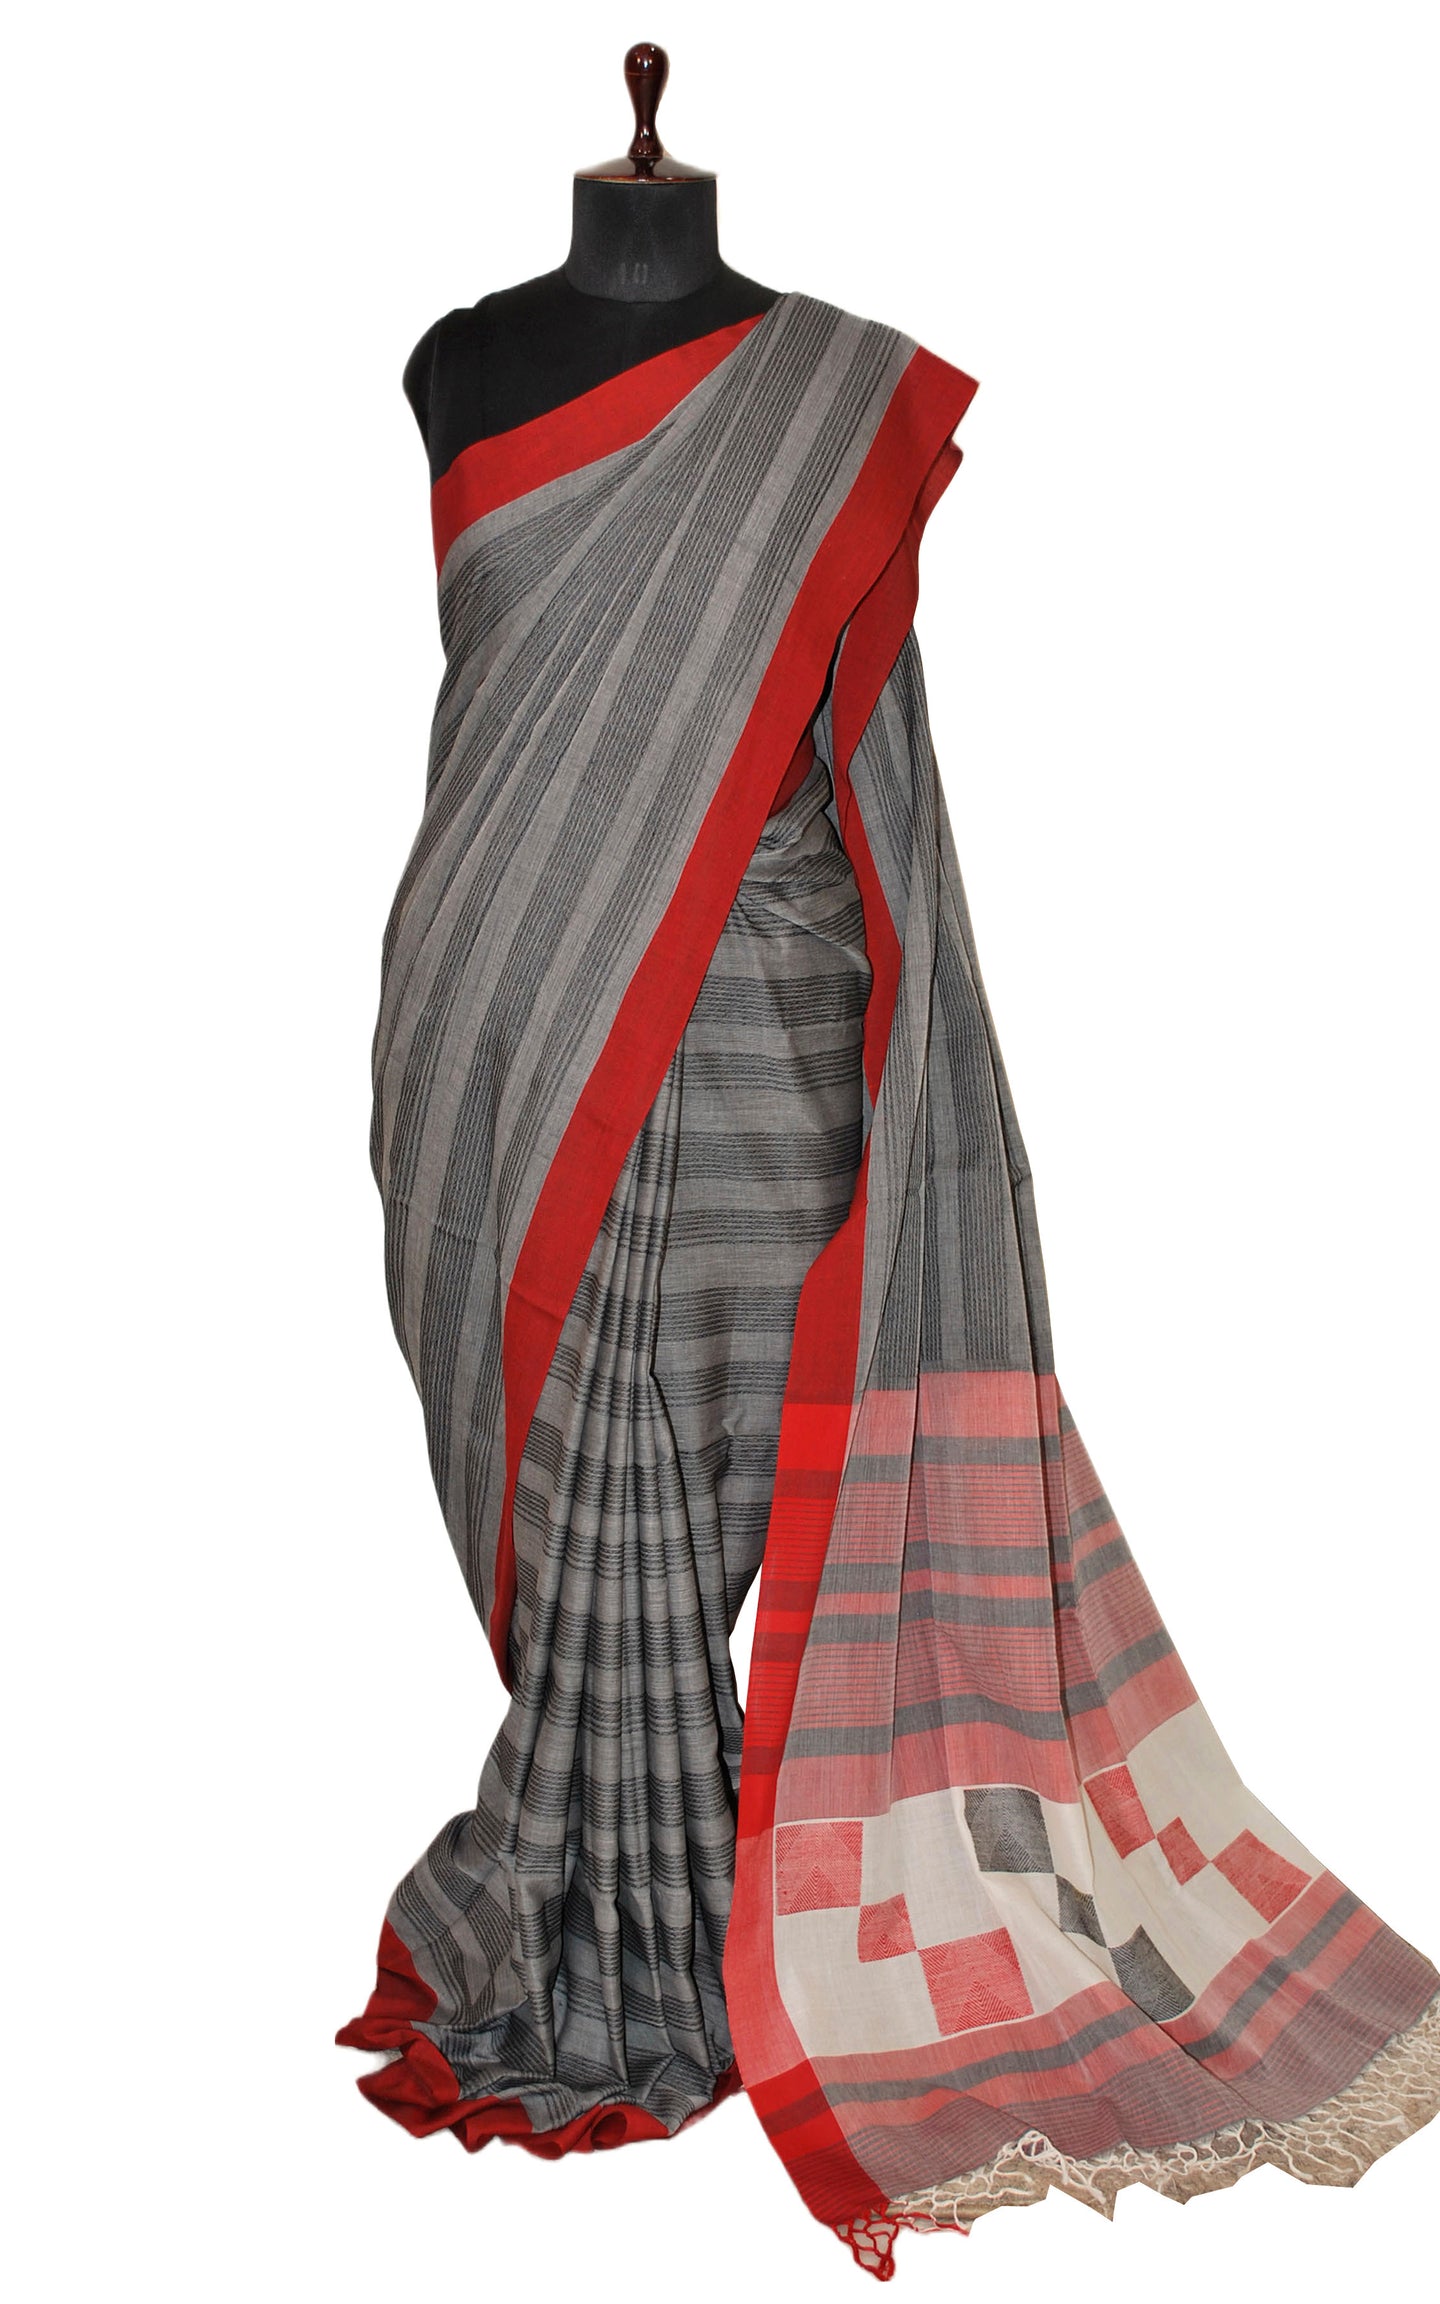 Self Woven Stripes Soft Cotton Jamdani Saree in Charcoal Grey, Red and Black